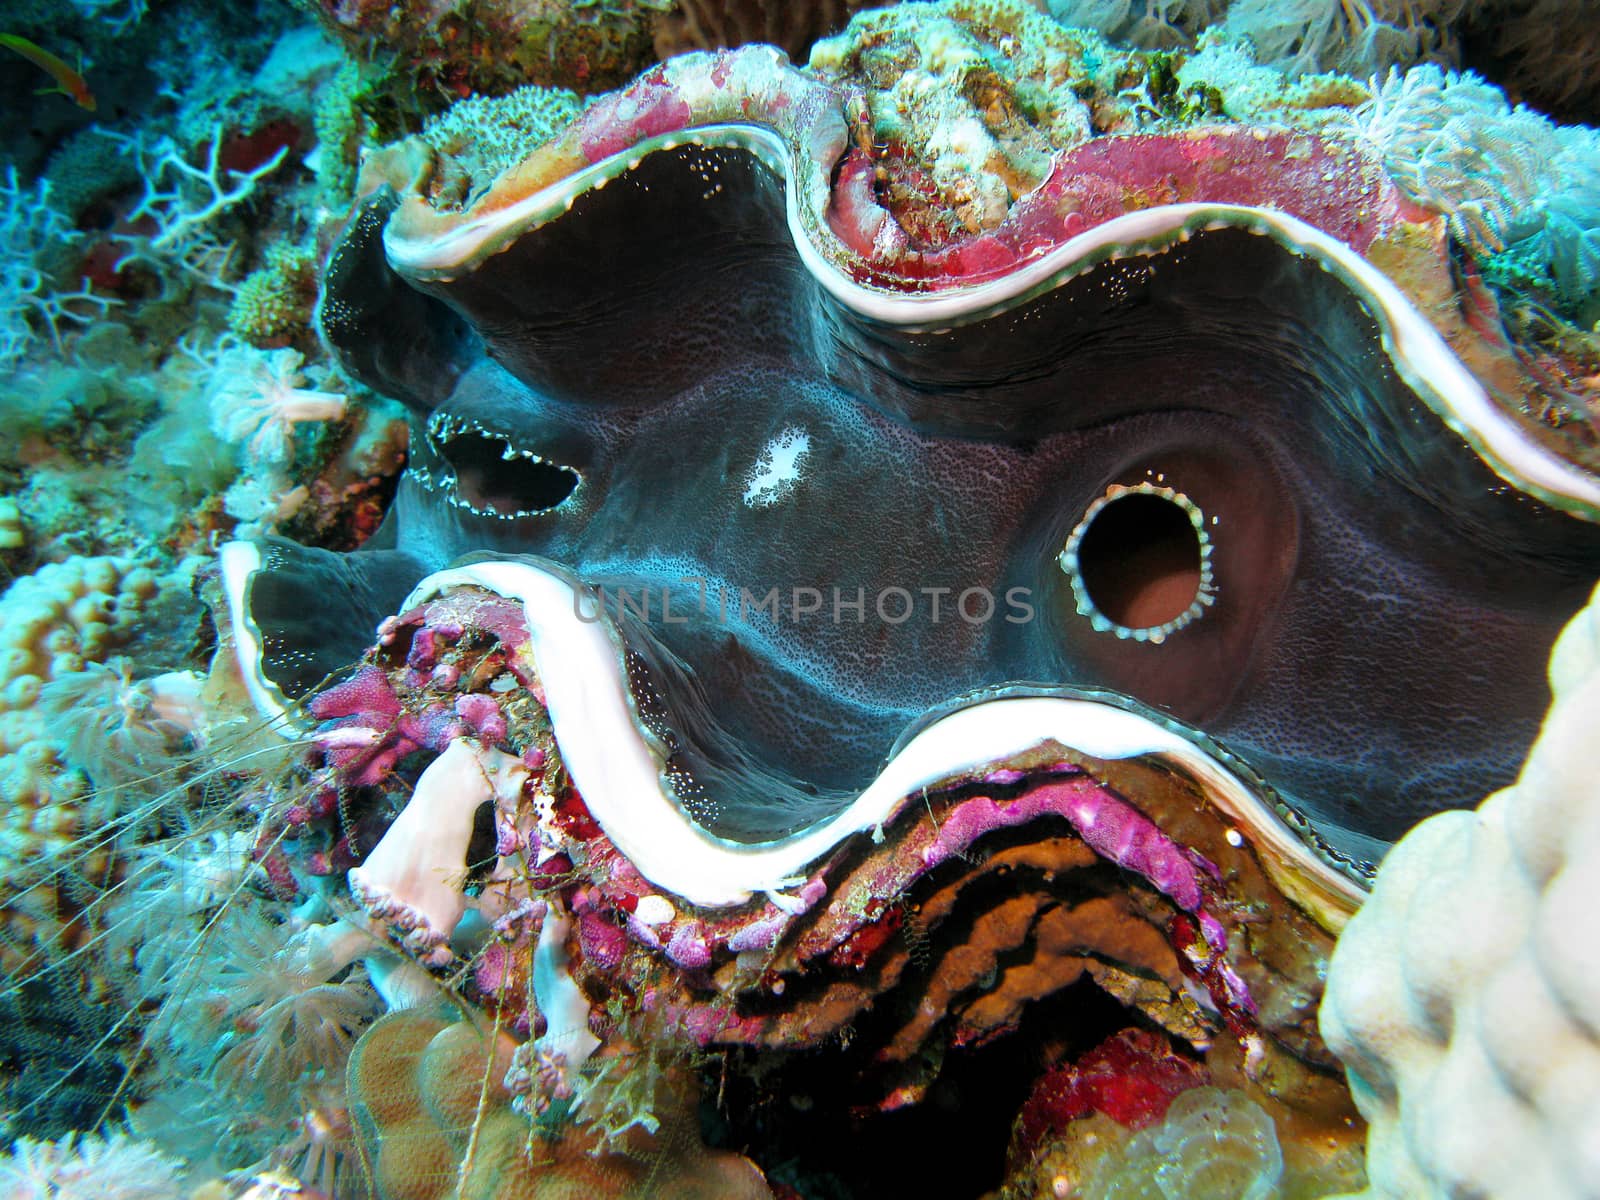 coral reef with giant clam - Tridacna gigas at the bottom of tropical sea - close up